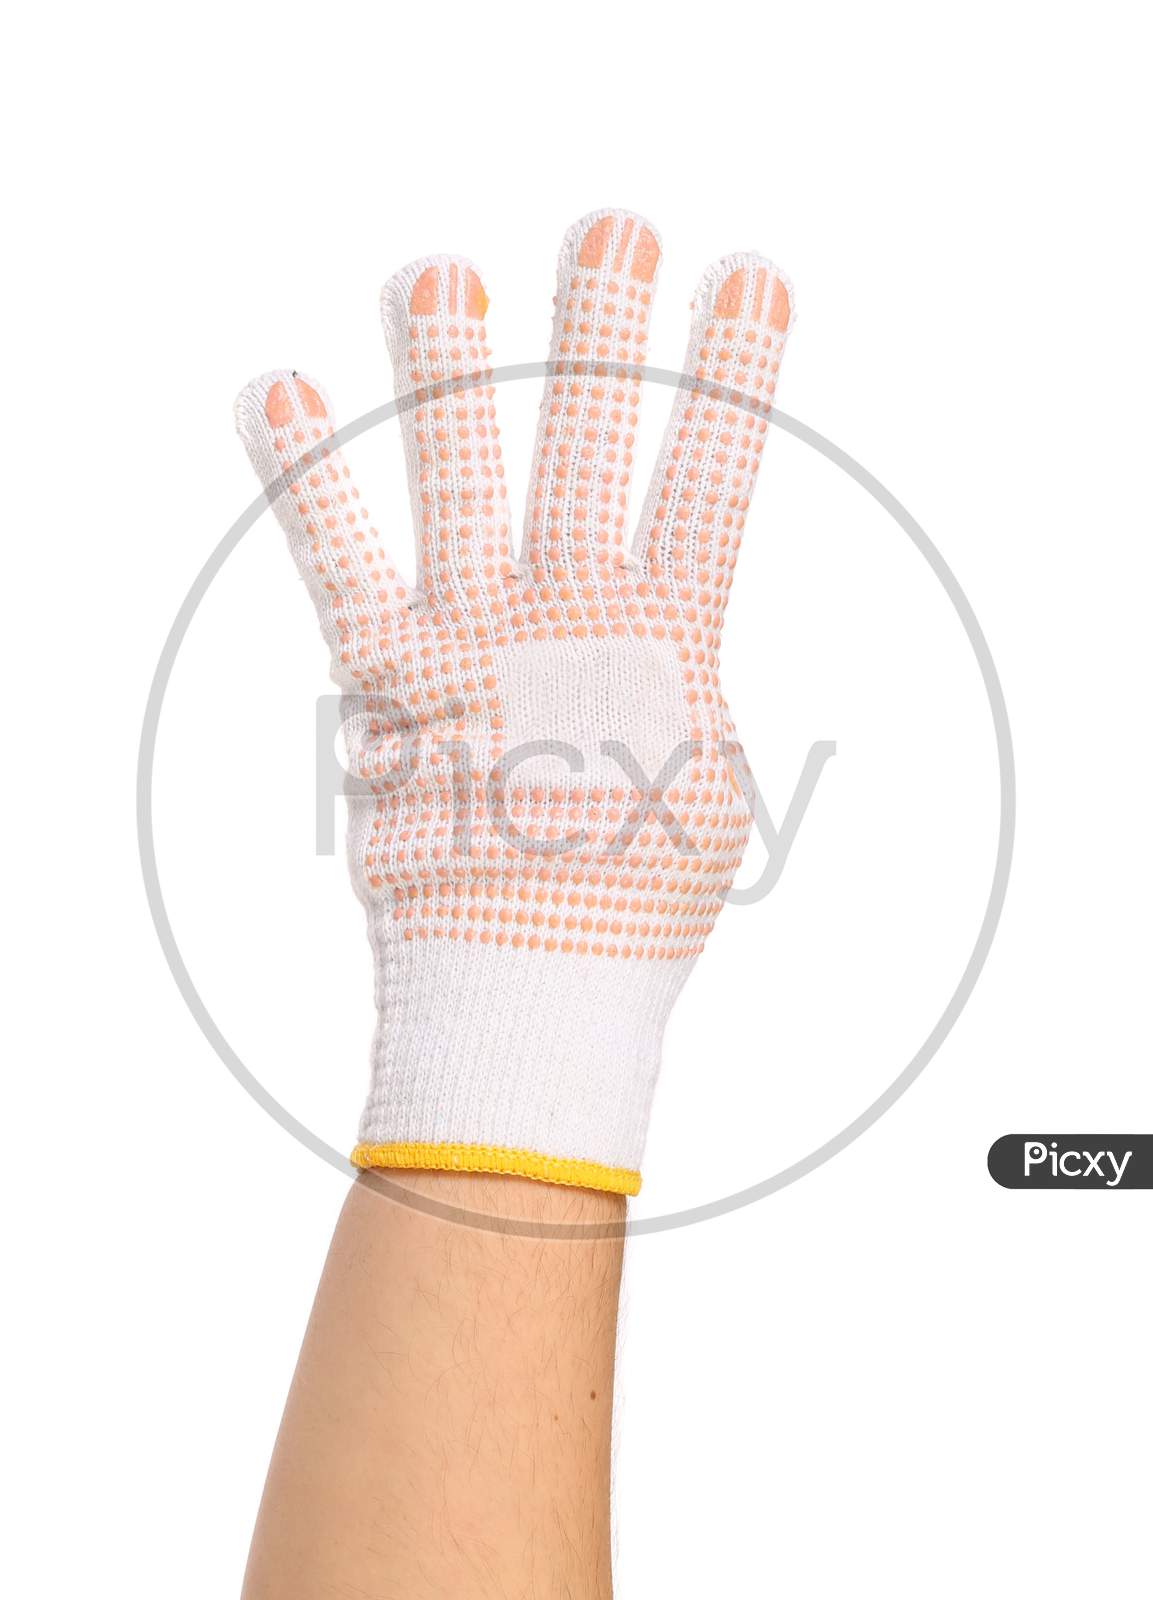 Hand In Glove Counts Four. Isolated On A White Background.